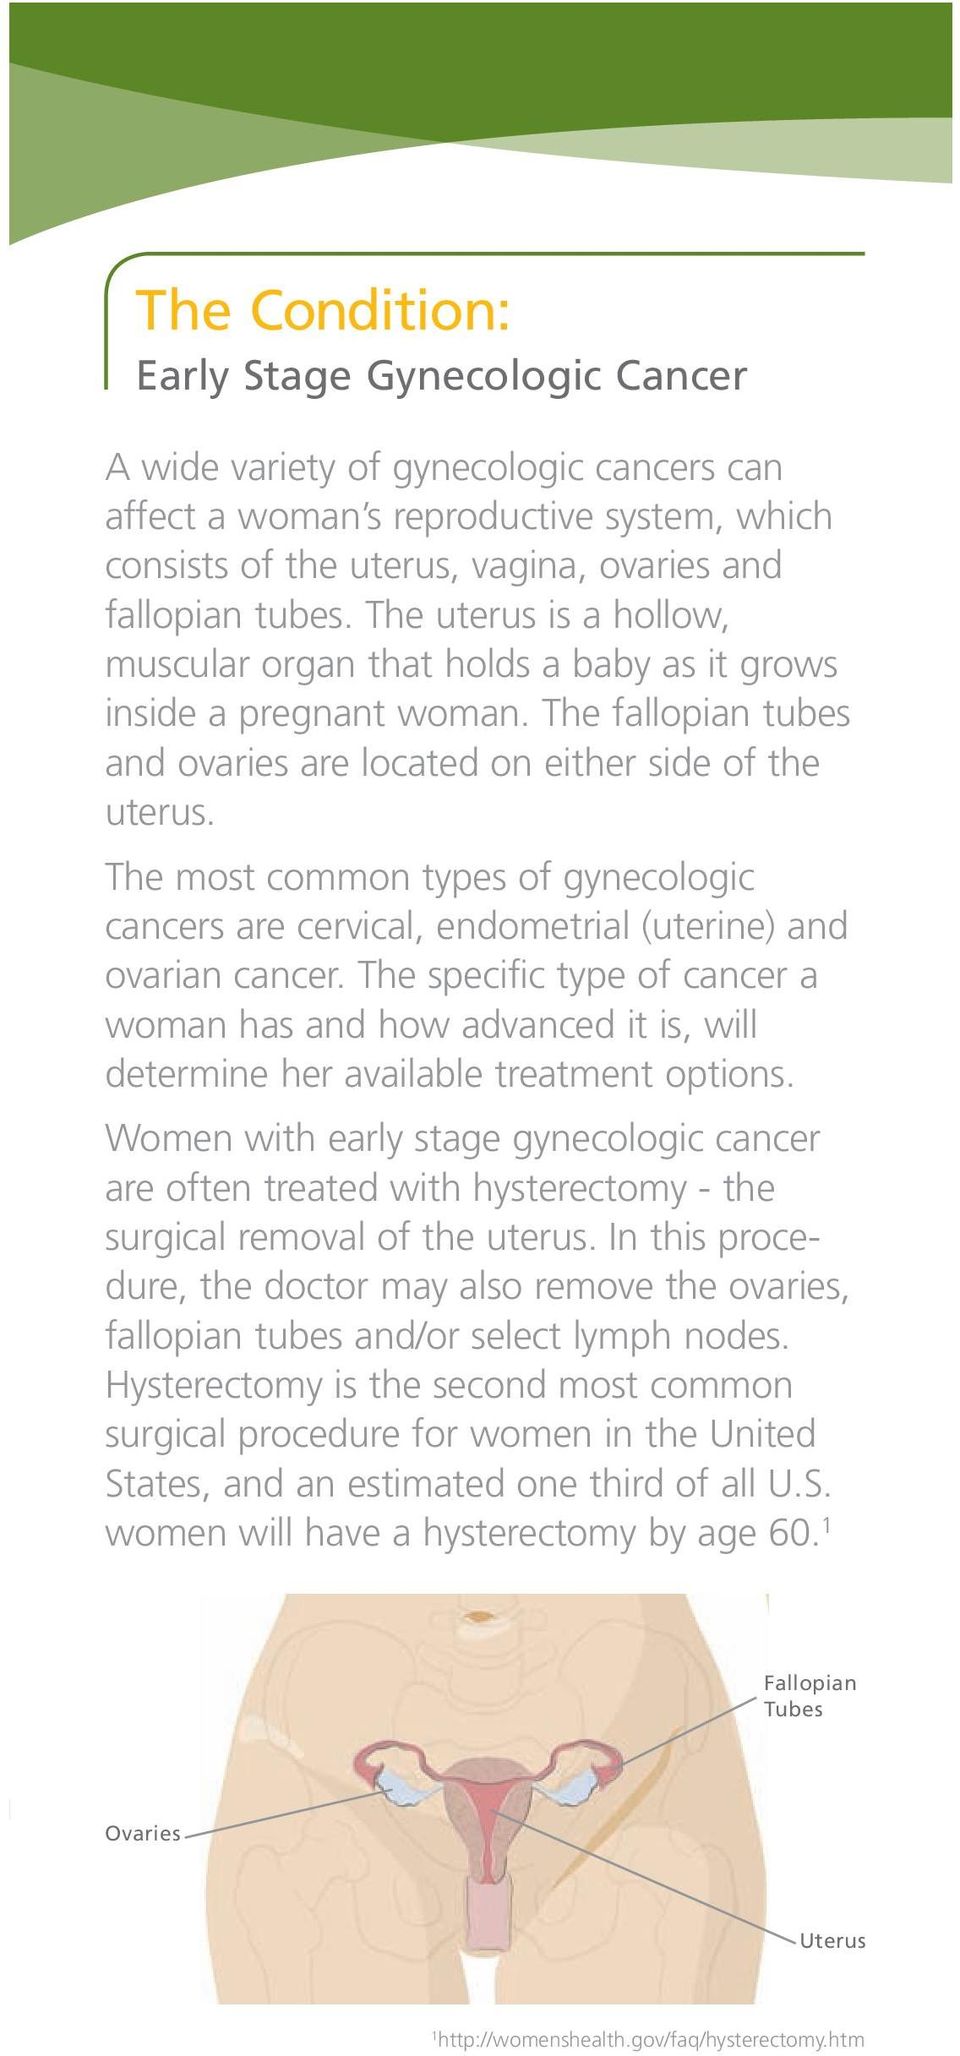 The most common types of gynecologic cancers are cervical, endometrial (uterine) and ovarian cancer.